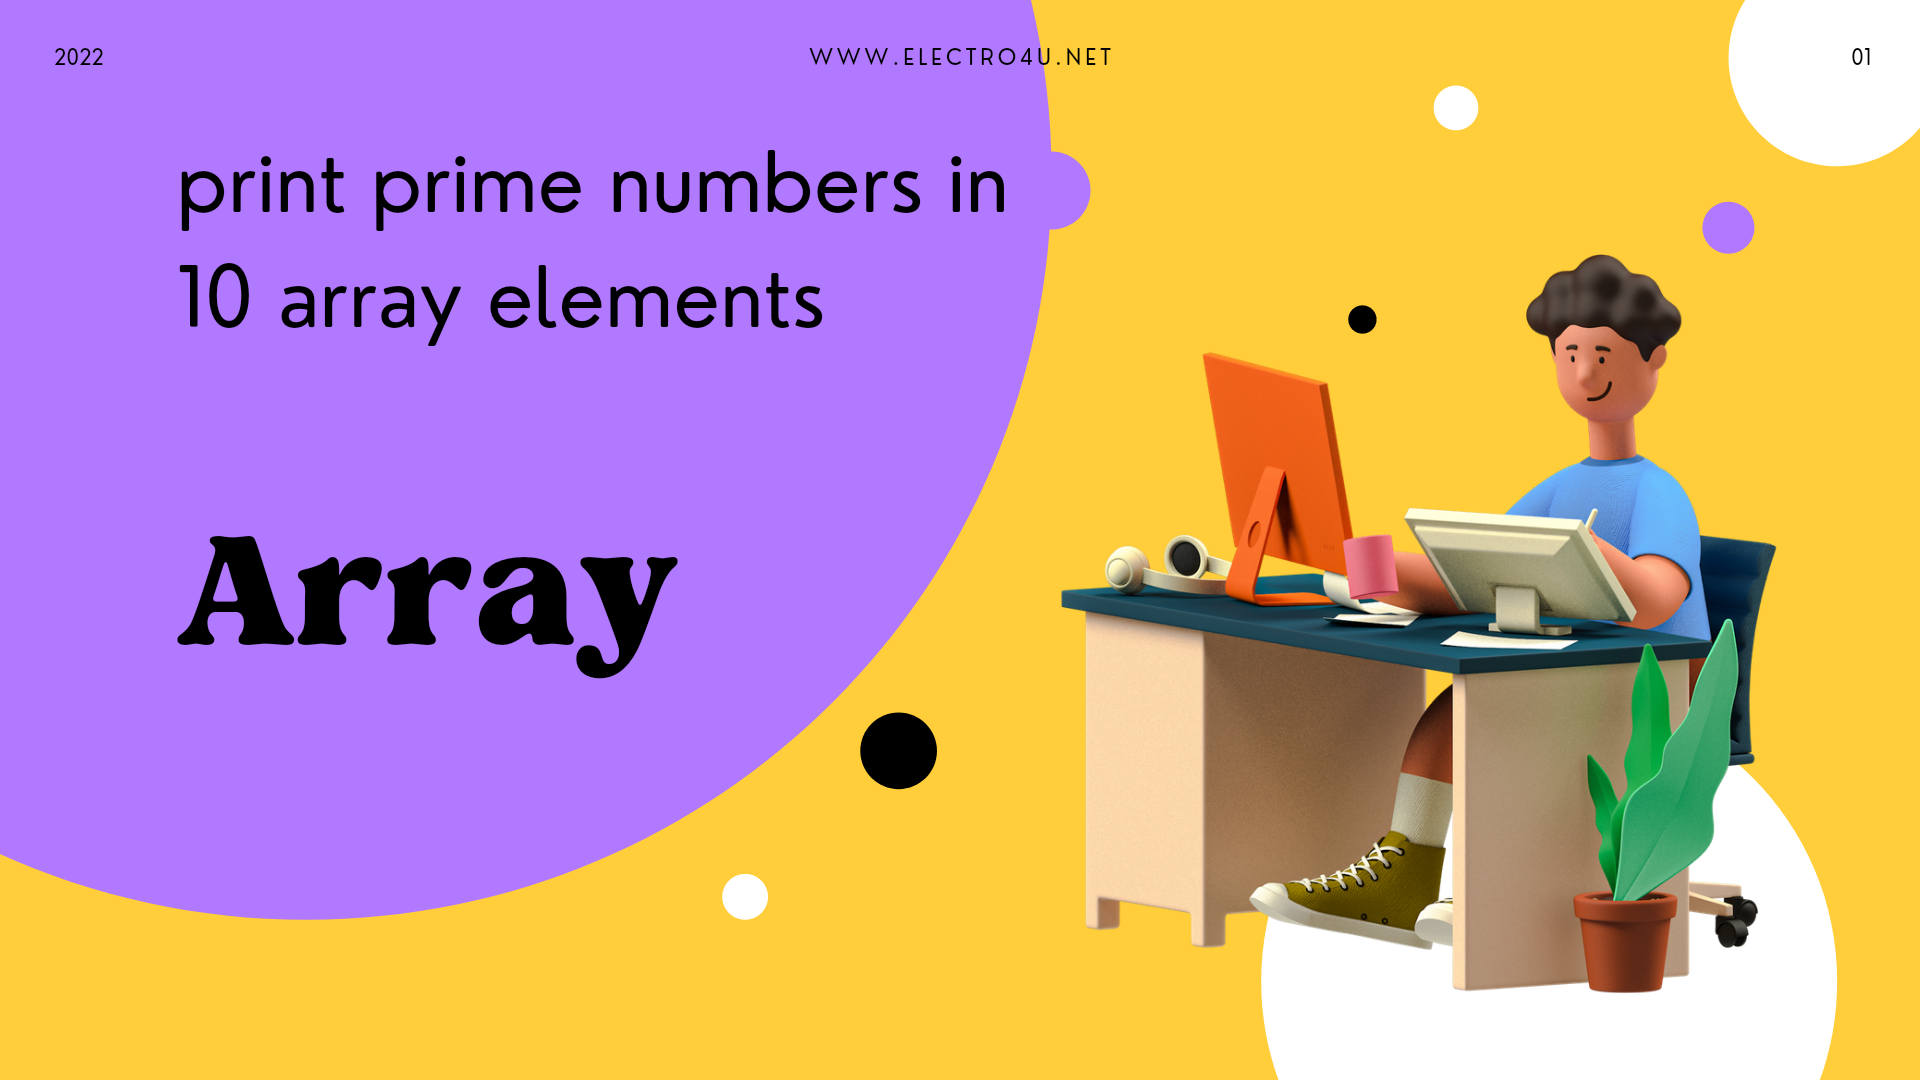 c-program-to-print-prime-numbers-in-an-array-of-10-elements